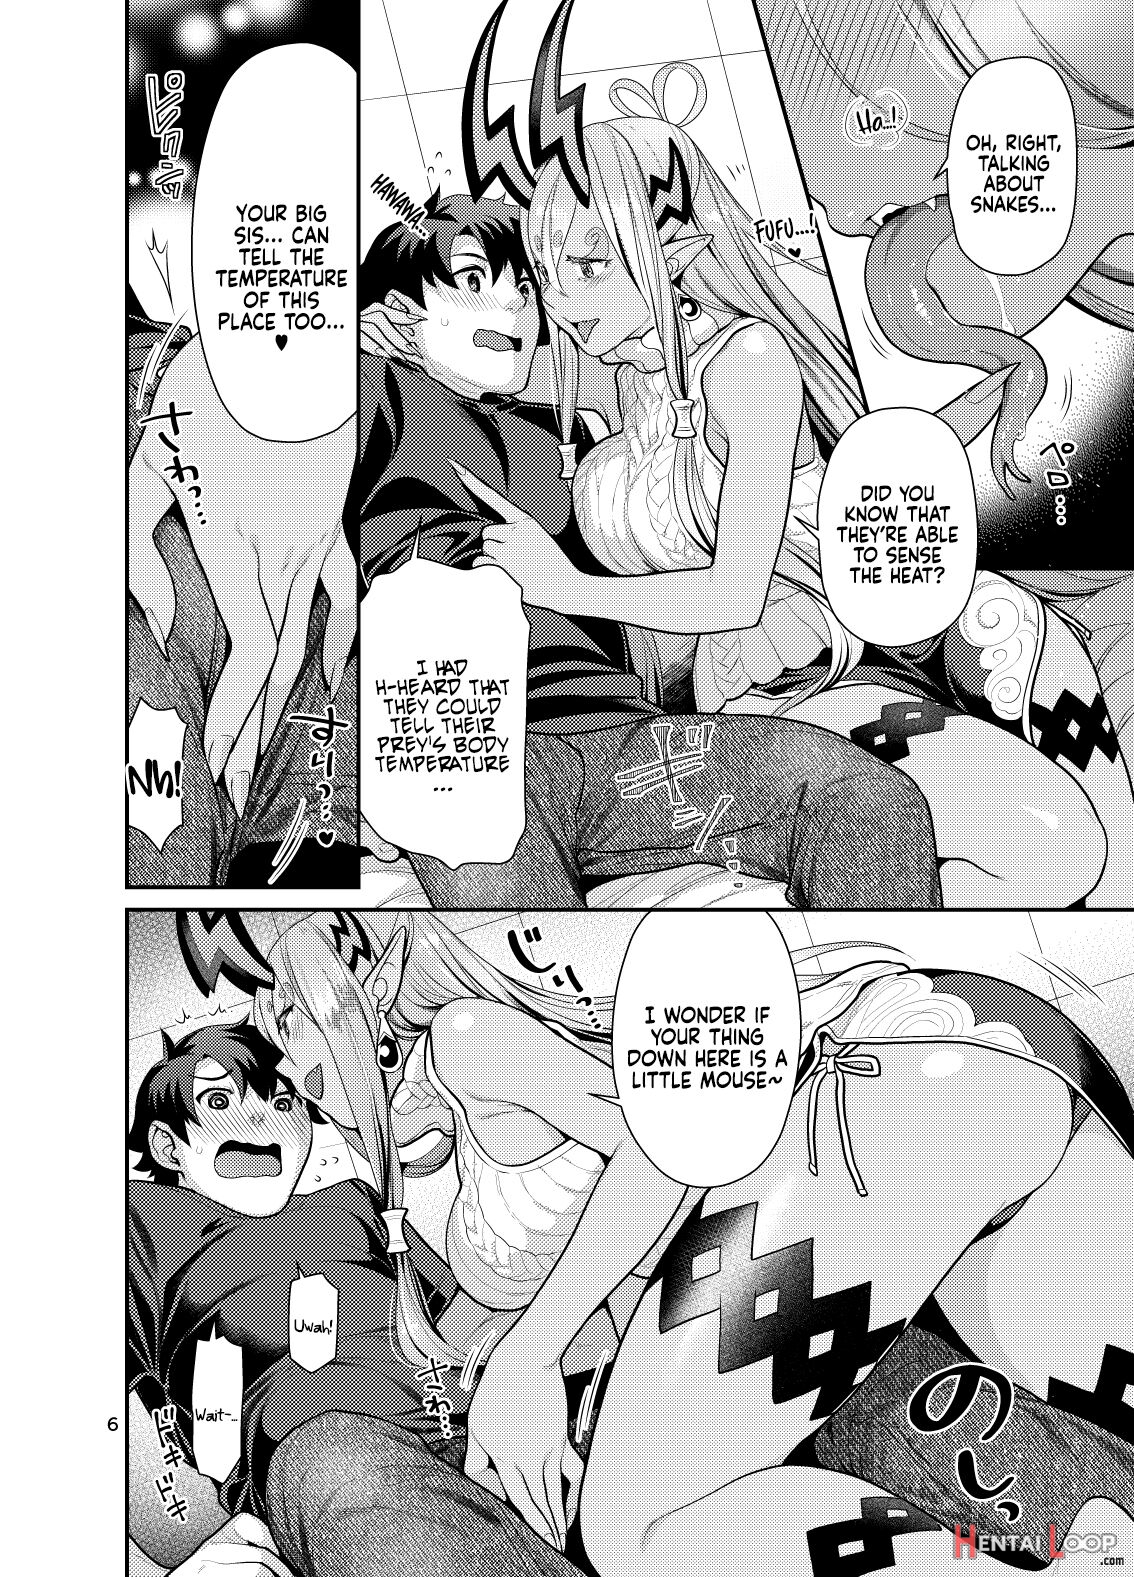 The Book About Making Out With Big Sis Ibuki page 7